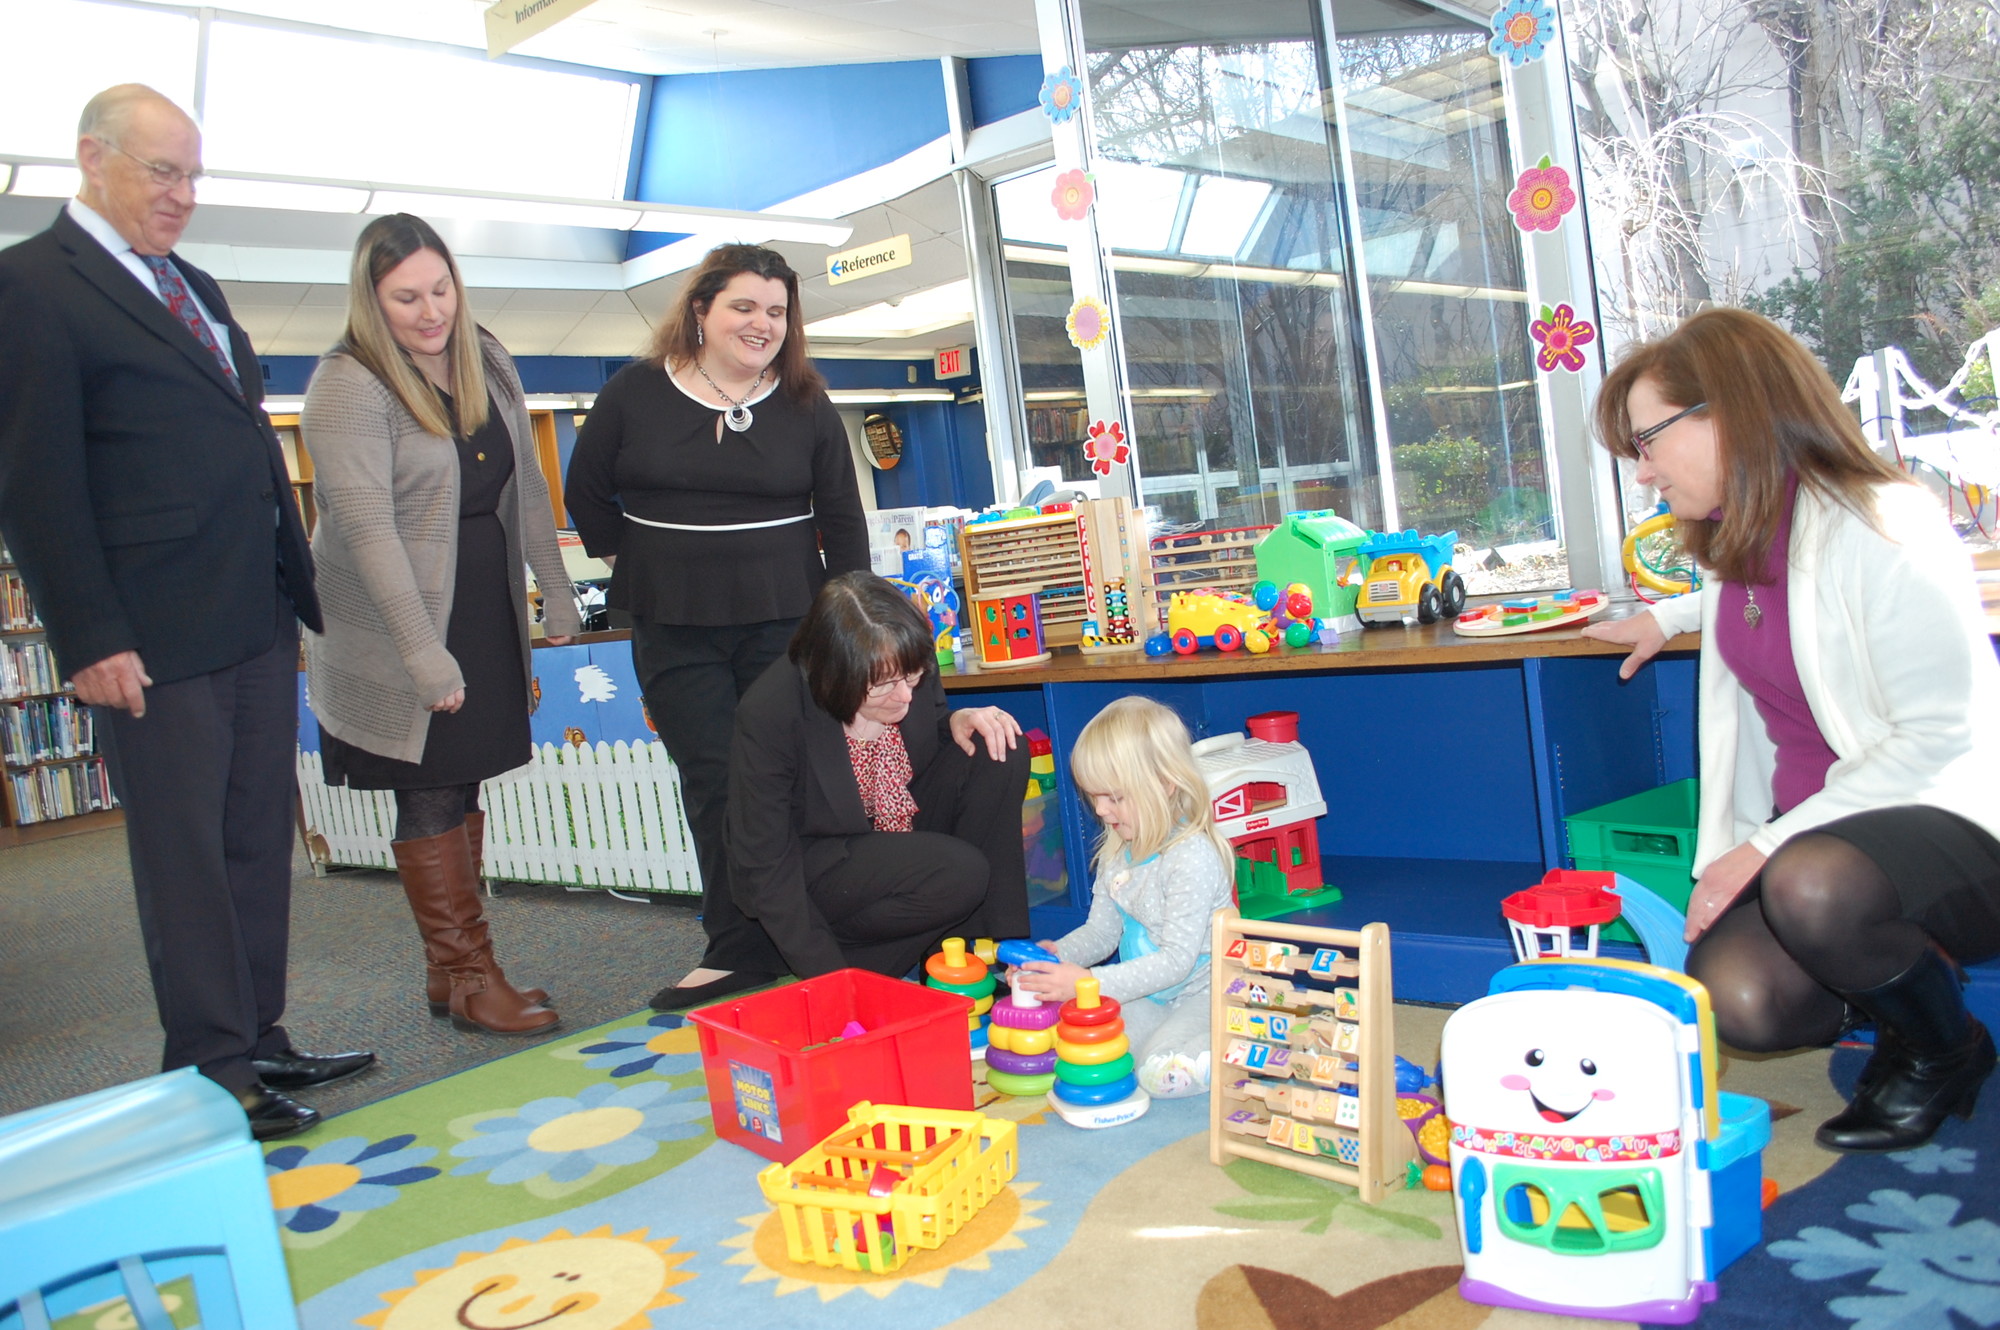 Assemblyman David McDonough, far left, Family Place librarians Michelle Kenney and Kristen Todd-Wurm, Wantagh Library Director Maggie Marino and children’s librarian Susan Finck watched 4-year-old Arianna Grout play with some of the new toys.